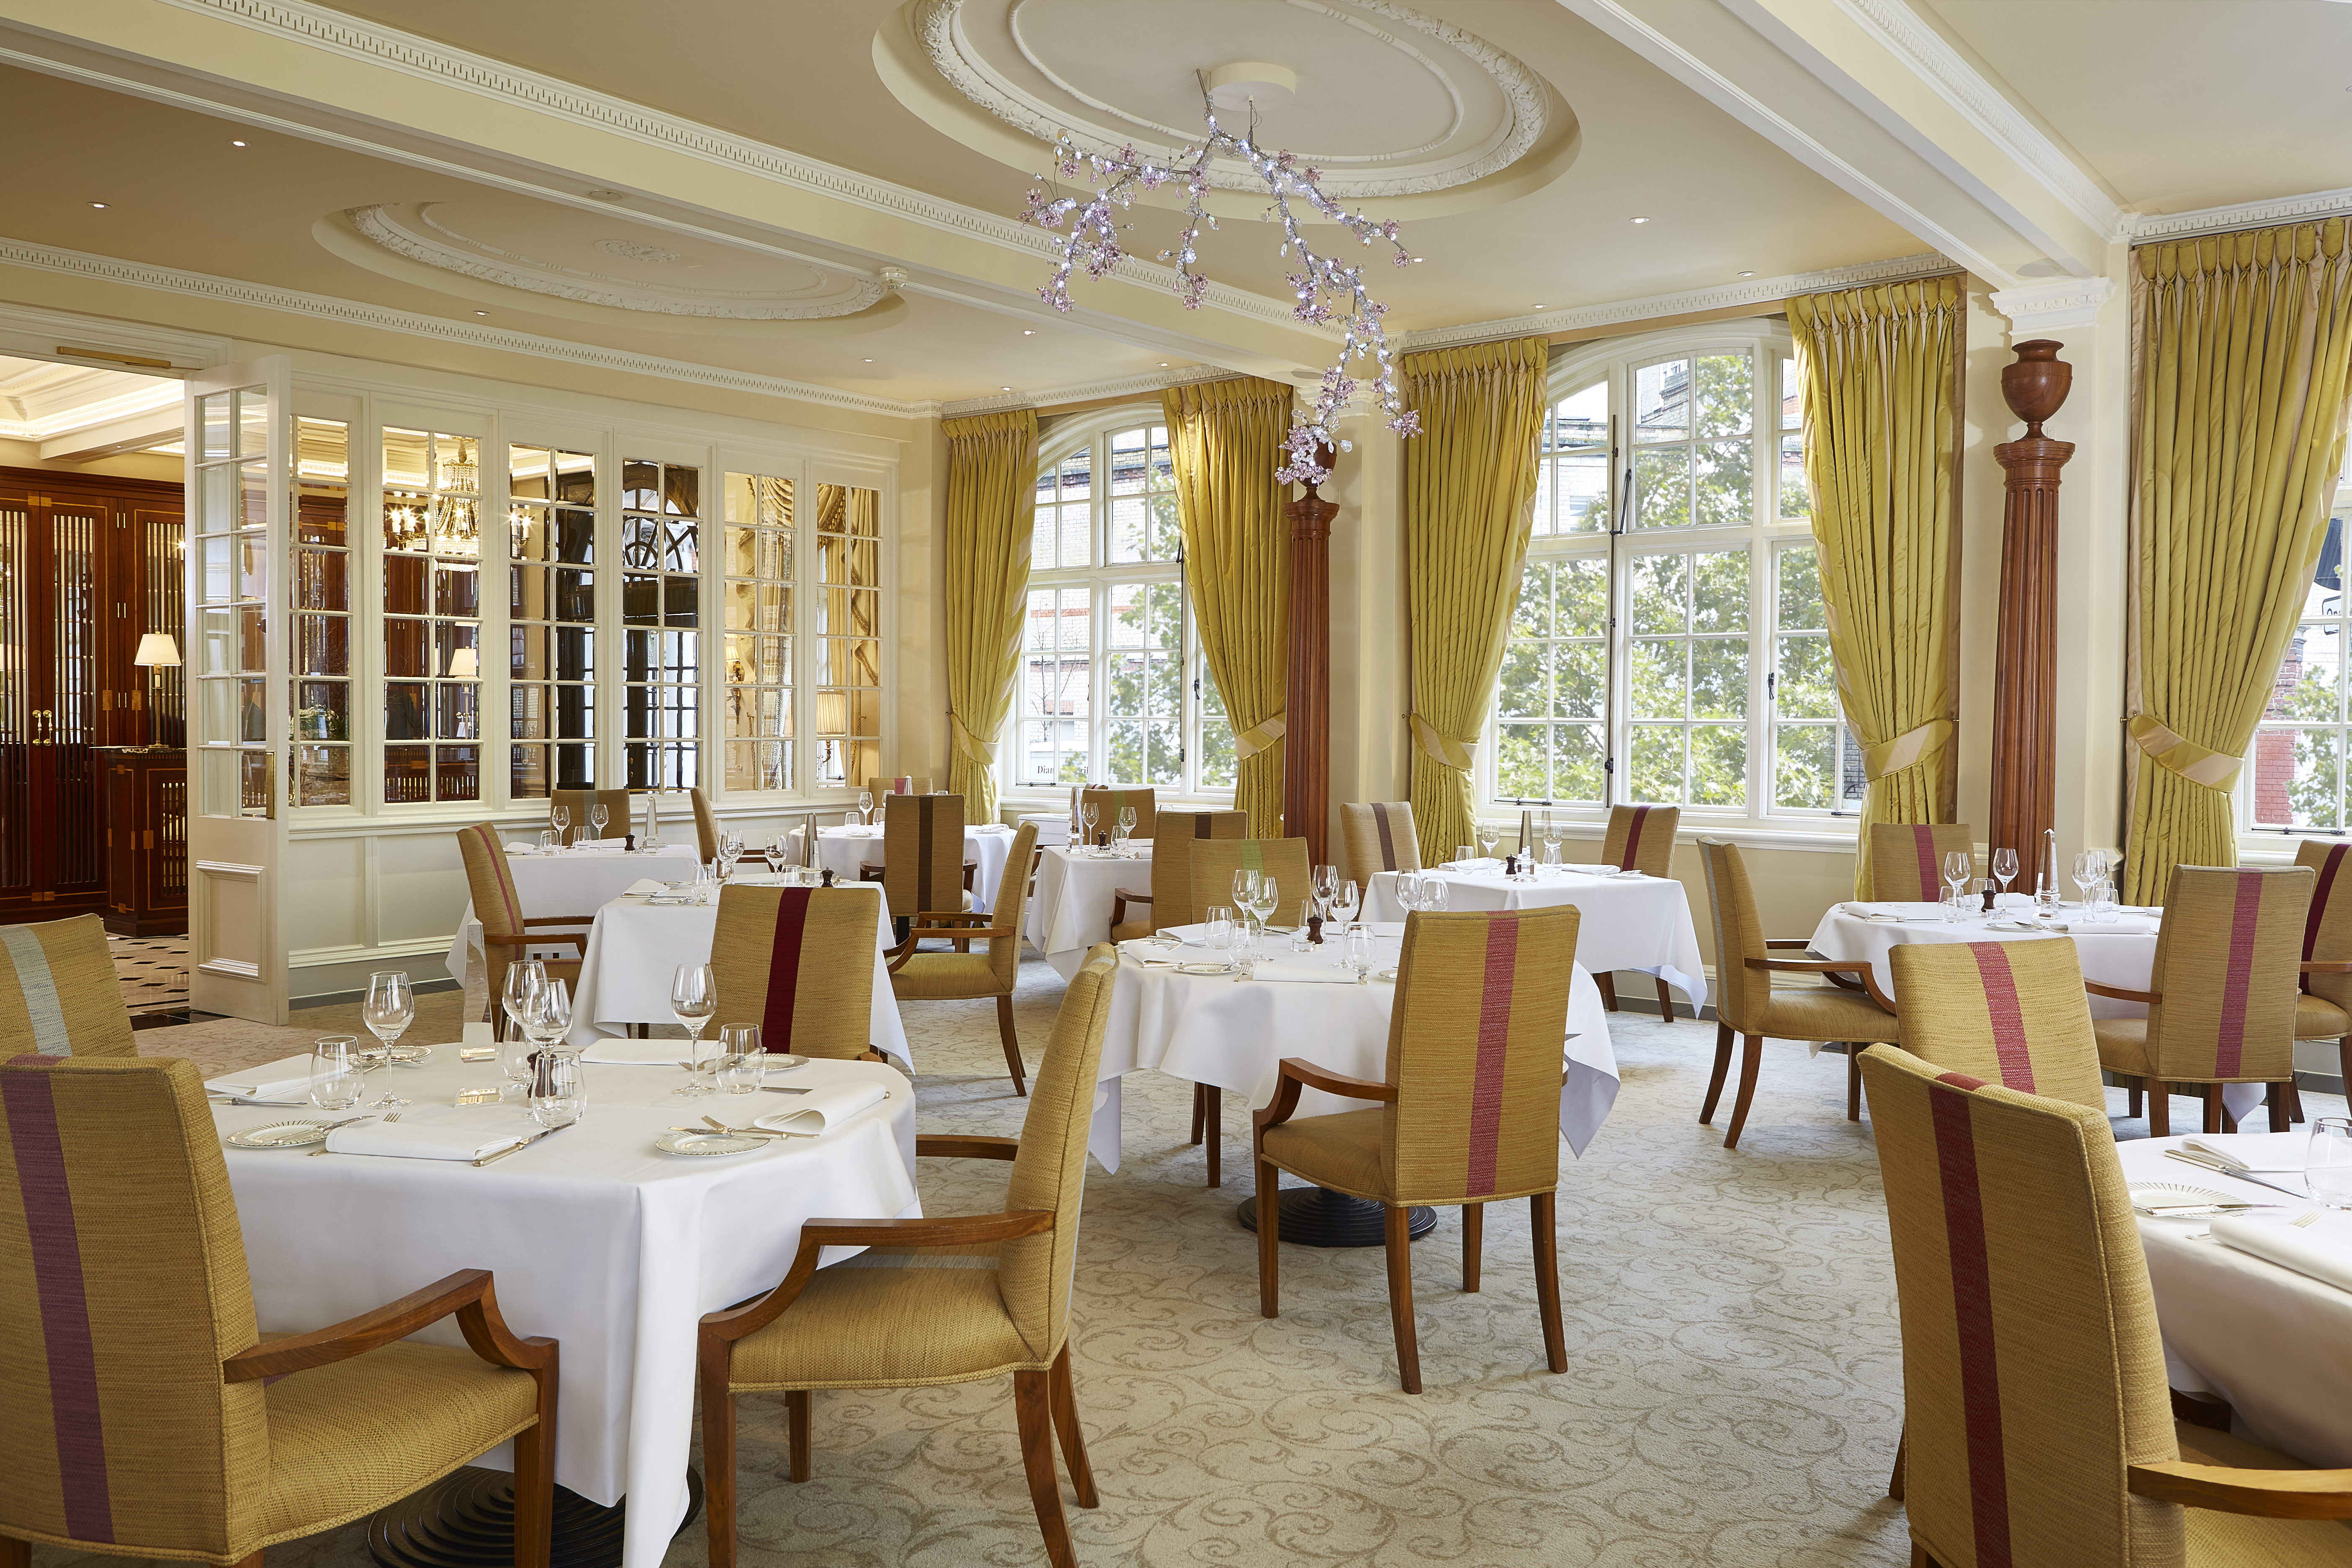 The Dining room at The Goring